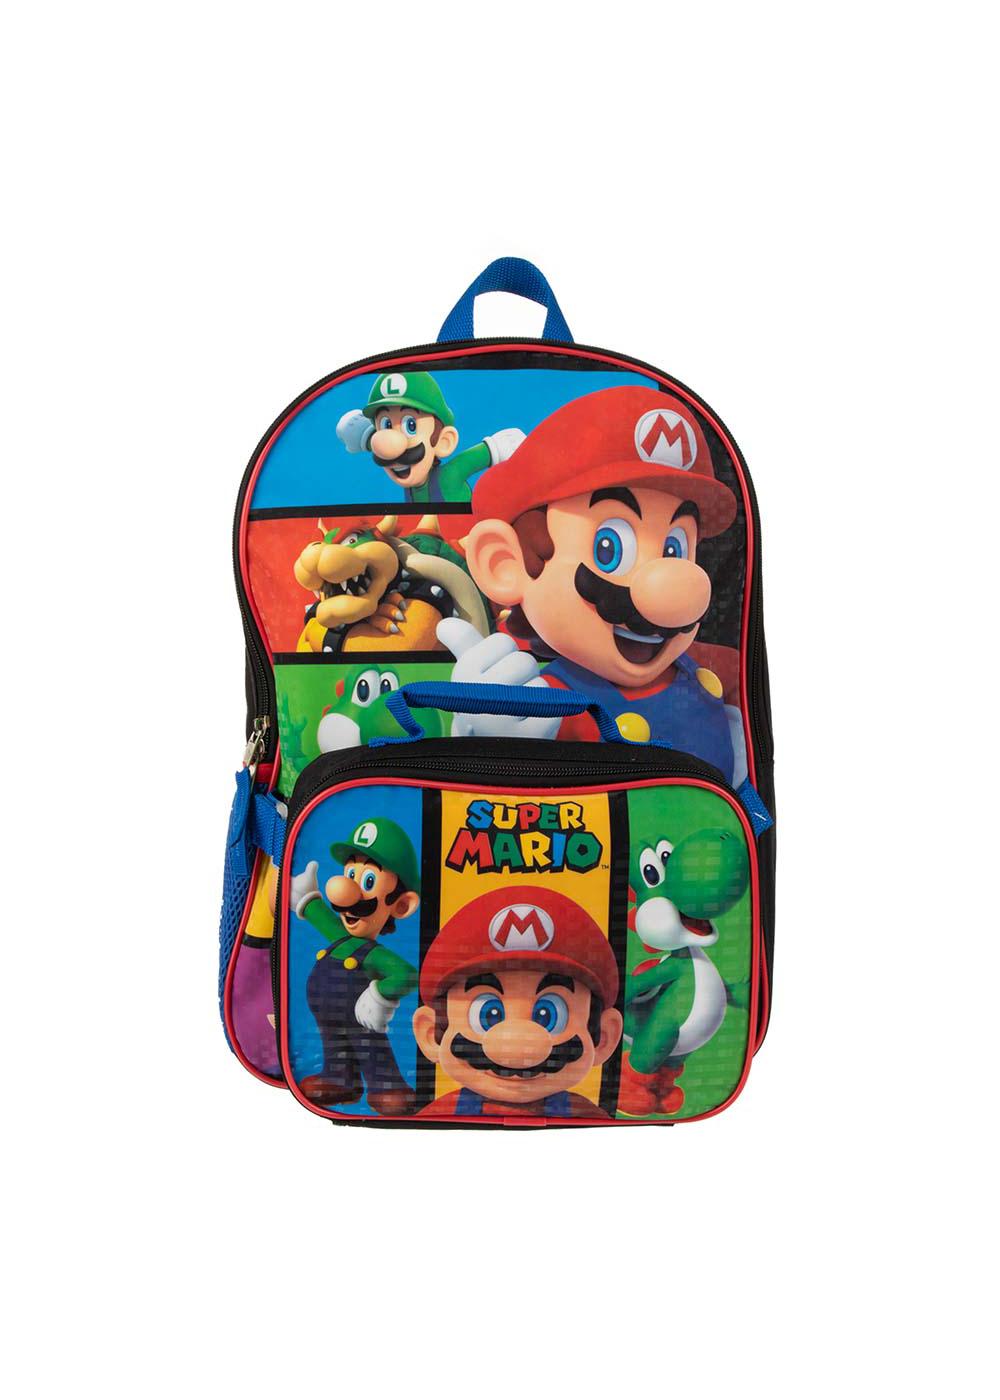 Super Mario Backpack with Lunch Box Mario Kids Backpack 2 Piece